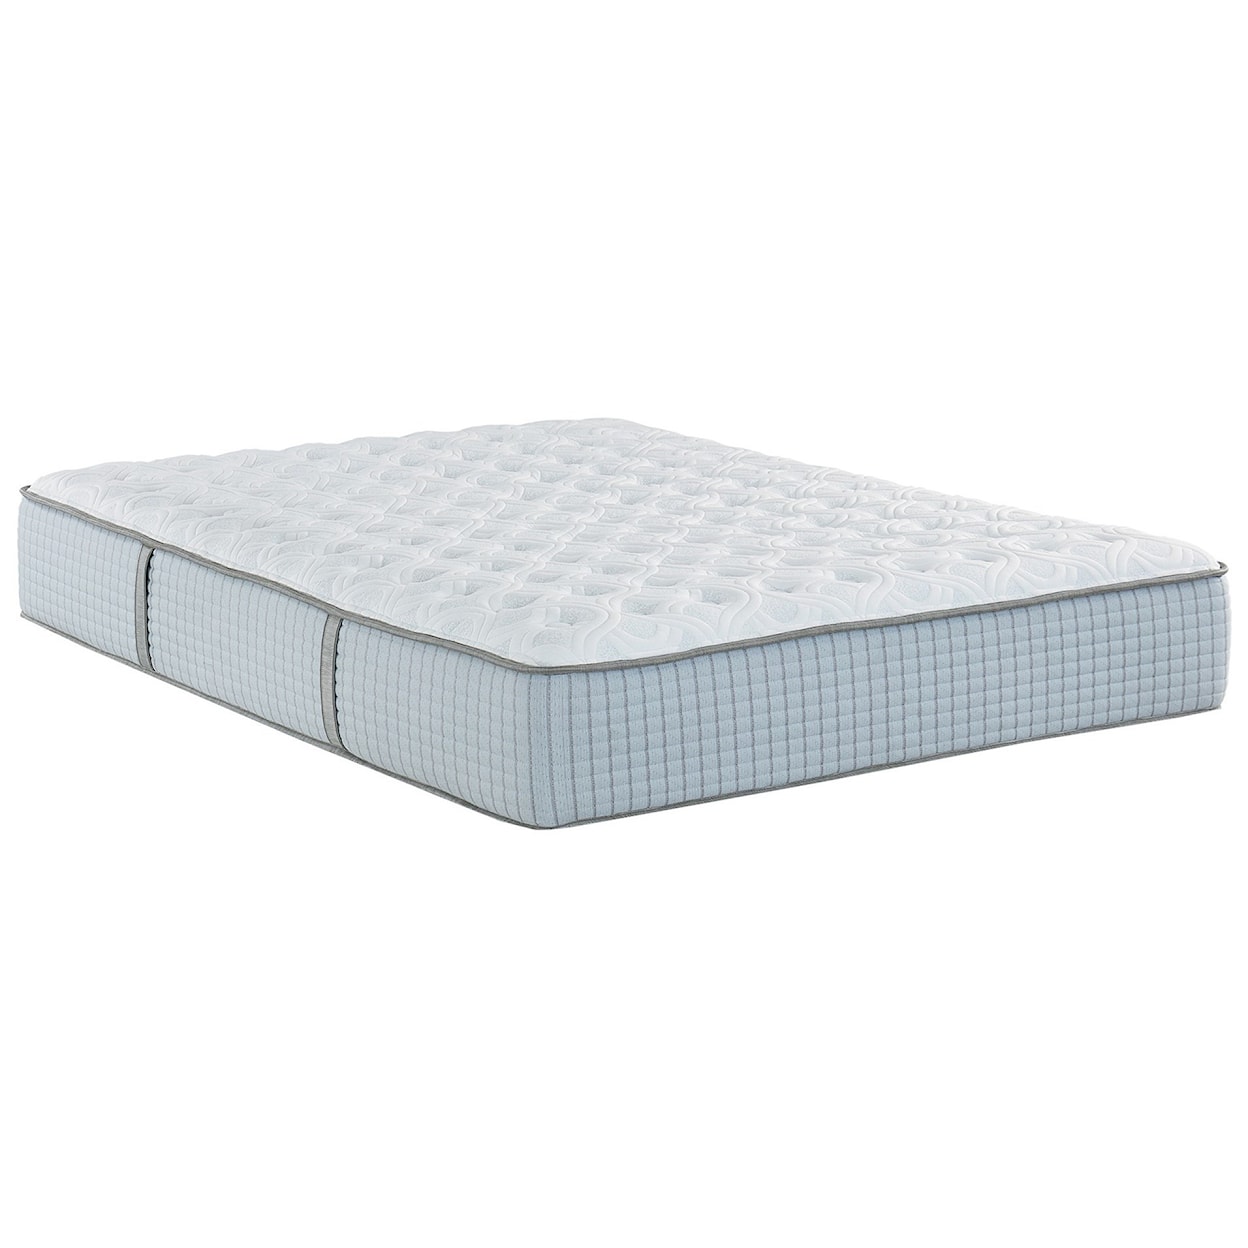 Restonic Chantelle Extra Firm Cal King Extra Firm 2-Sided Mattress